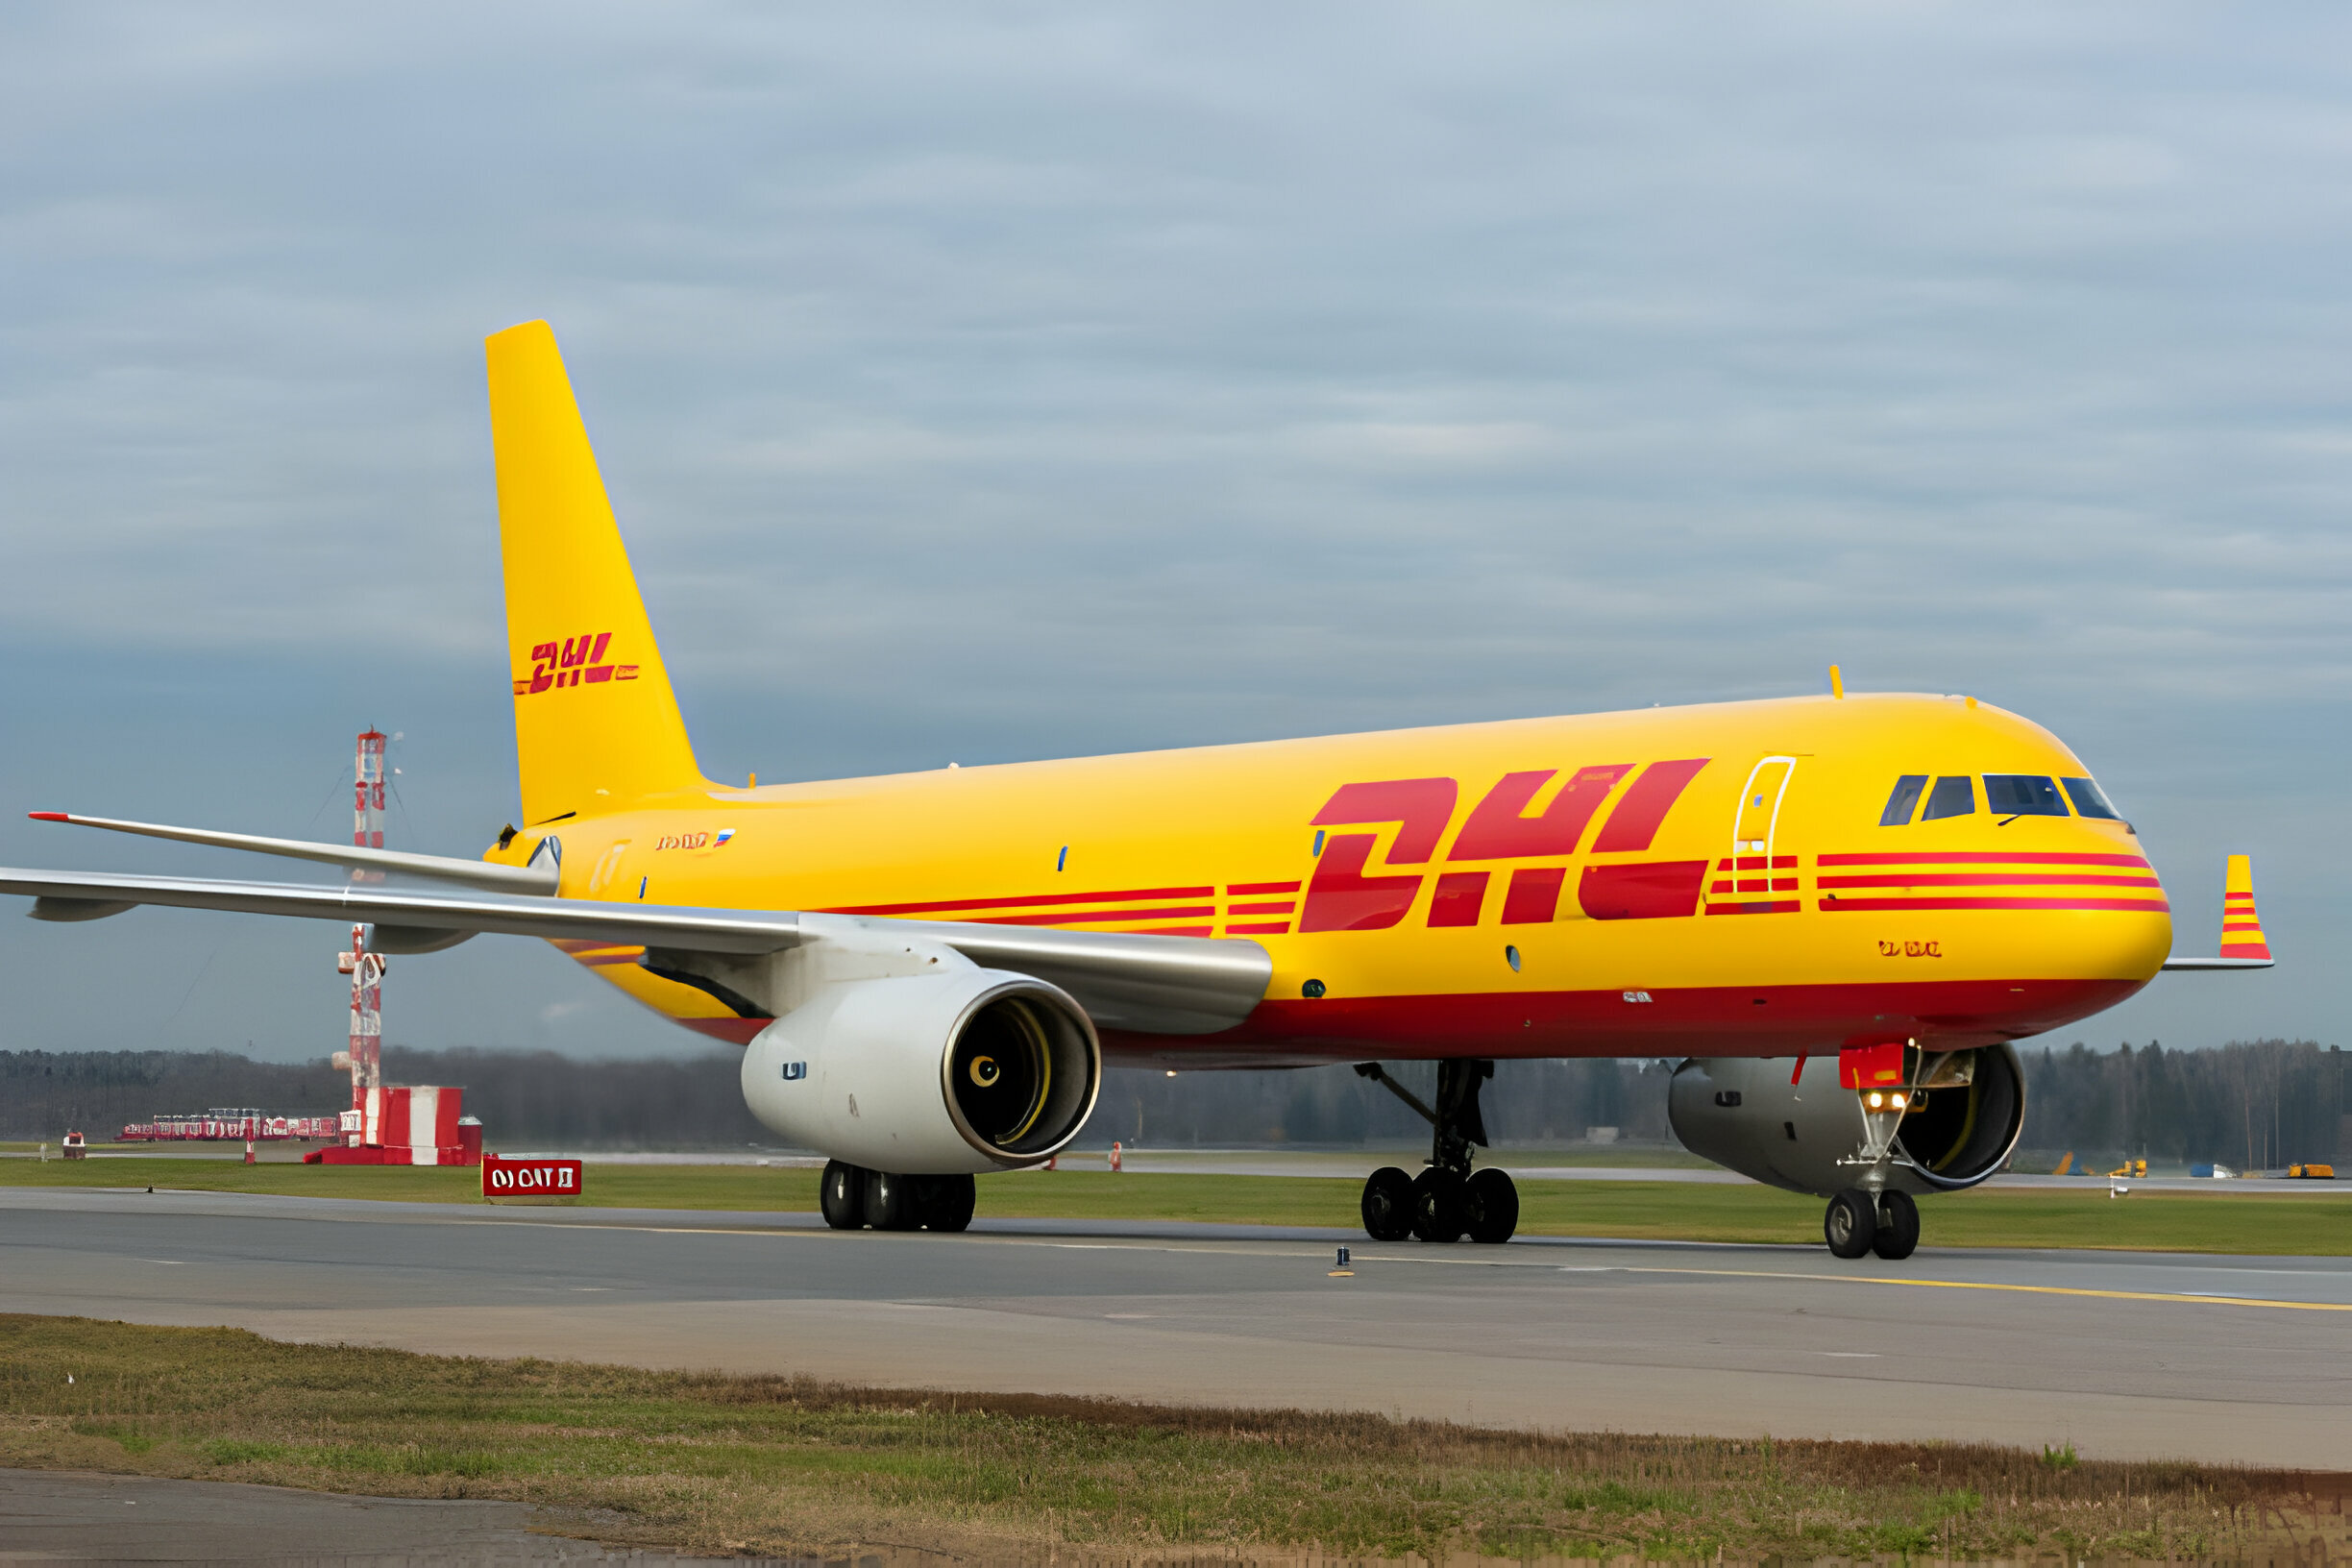 DHL Shipment on Hold: Why Is My Package Delayed? | Your Guide